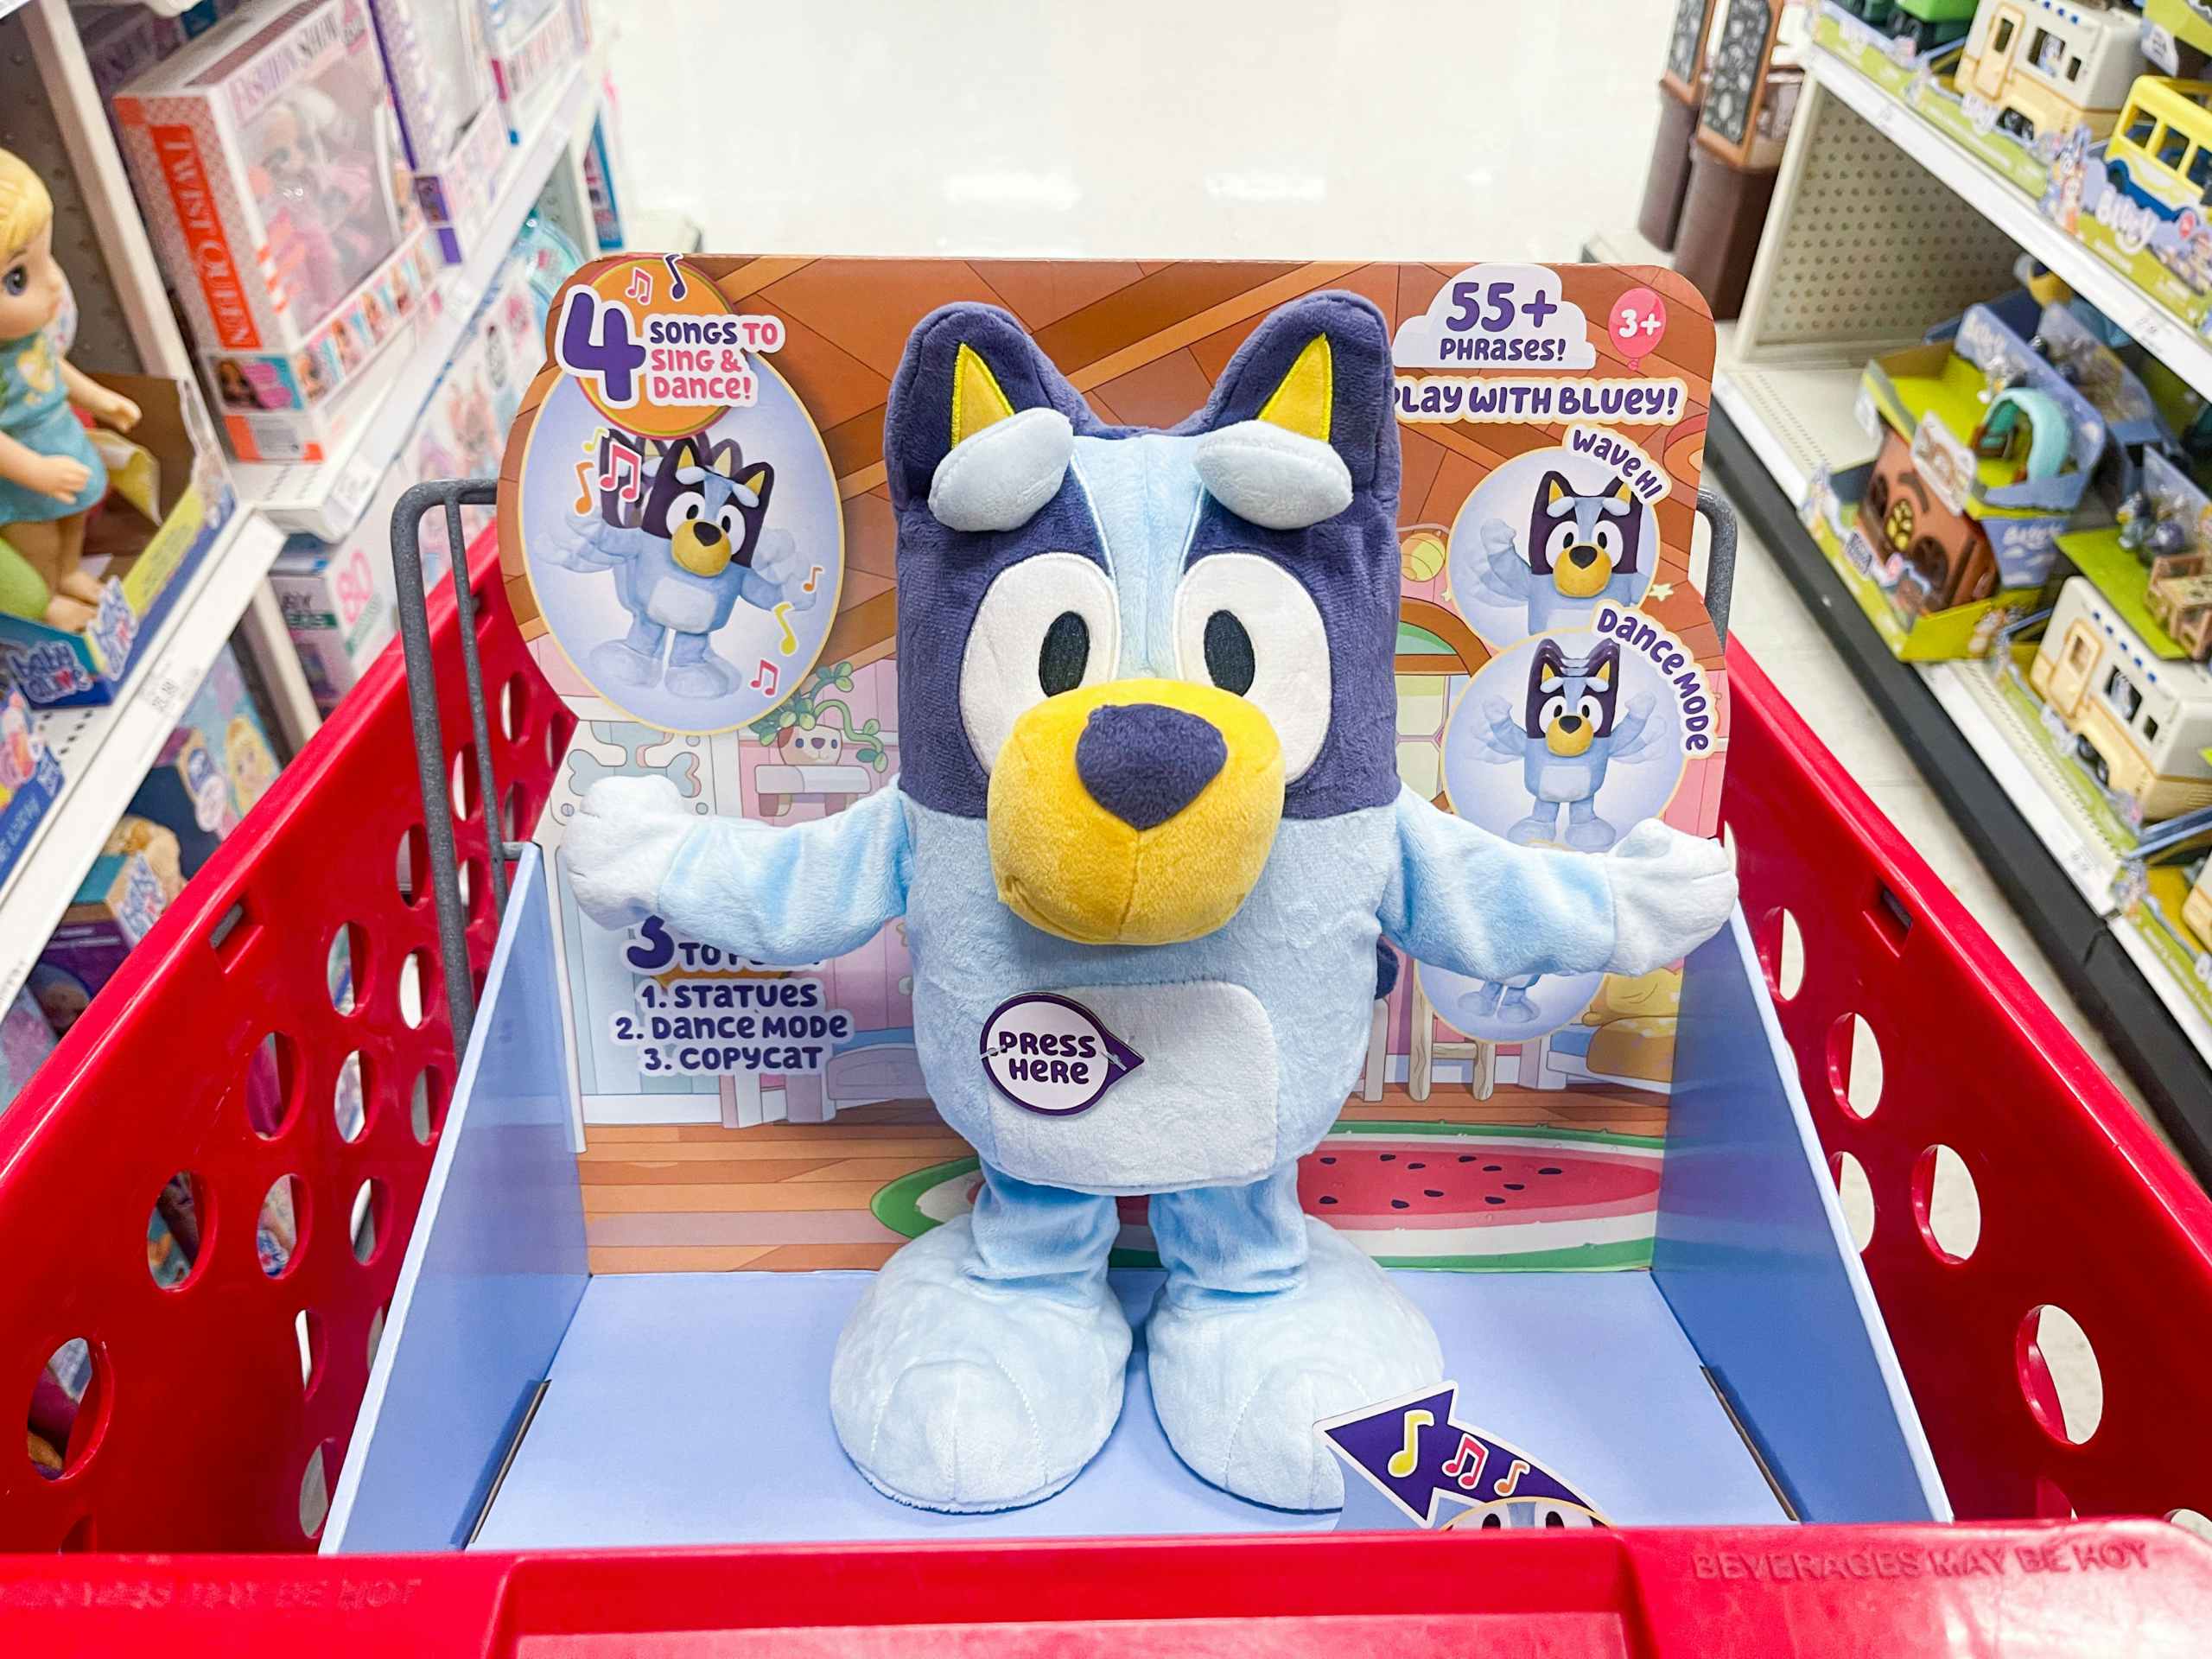 A Bluey Dance and Play sitting in a shopping cart